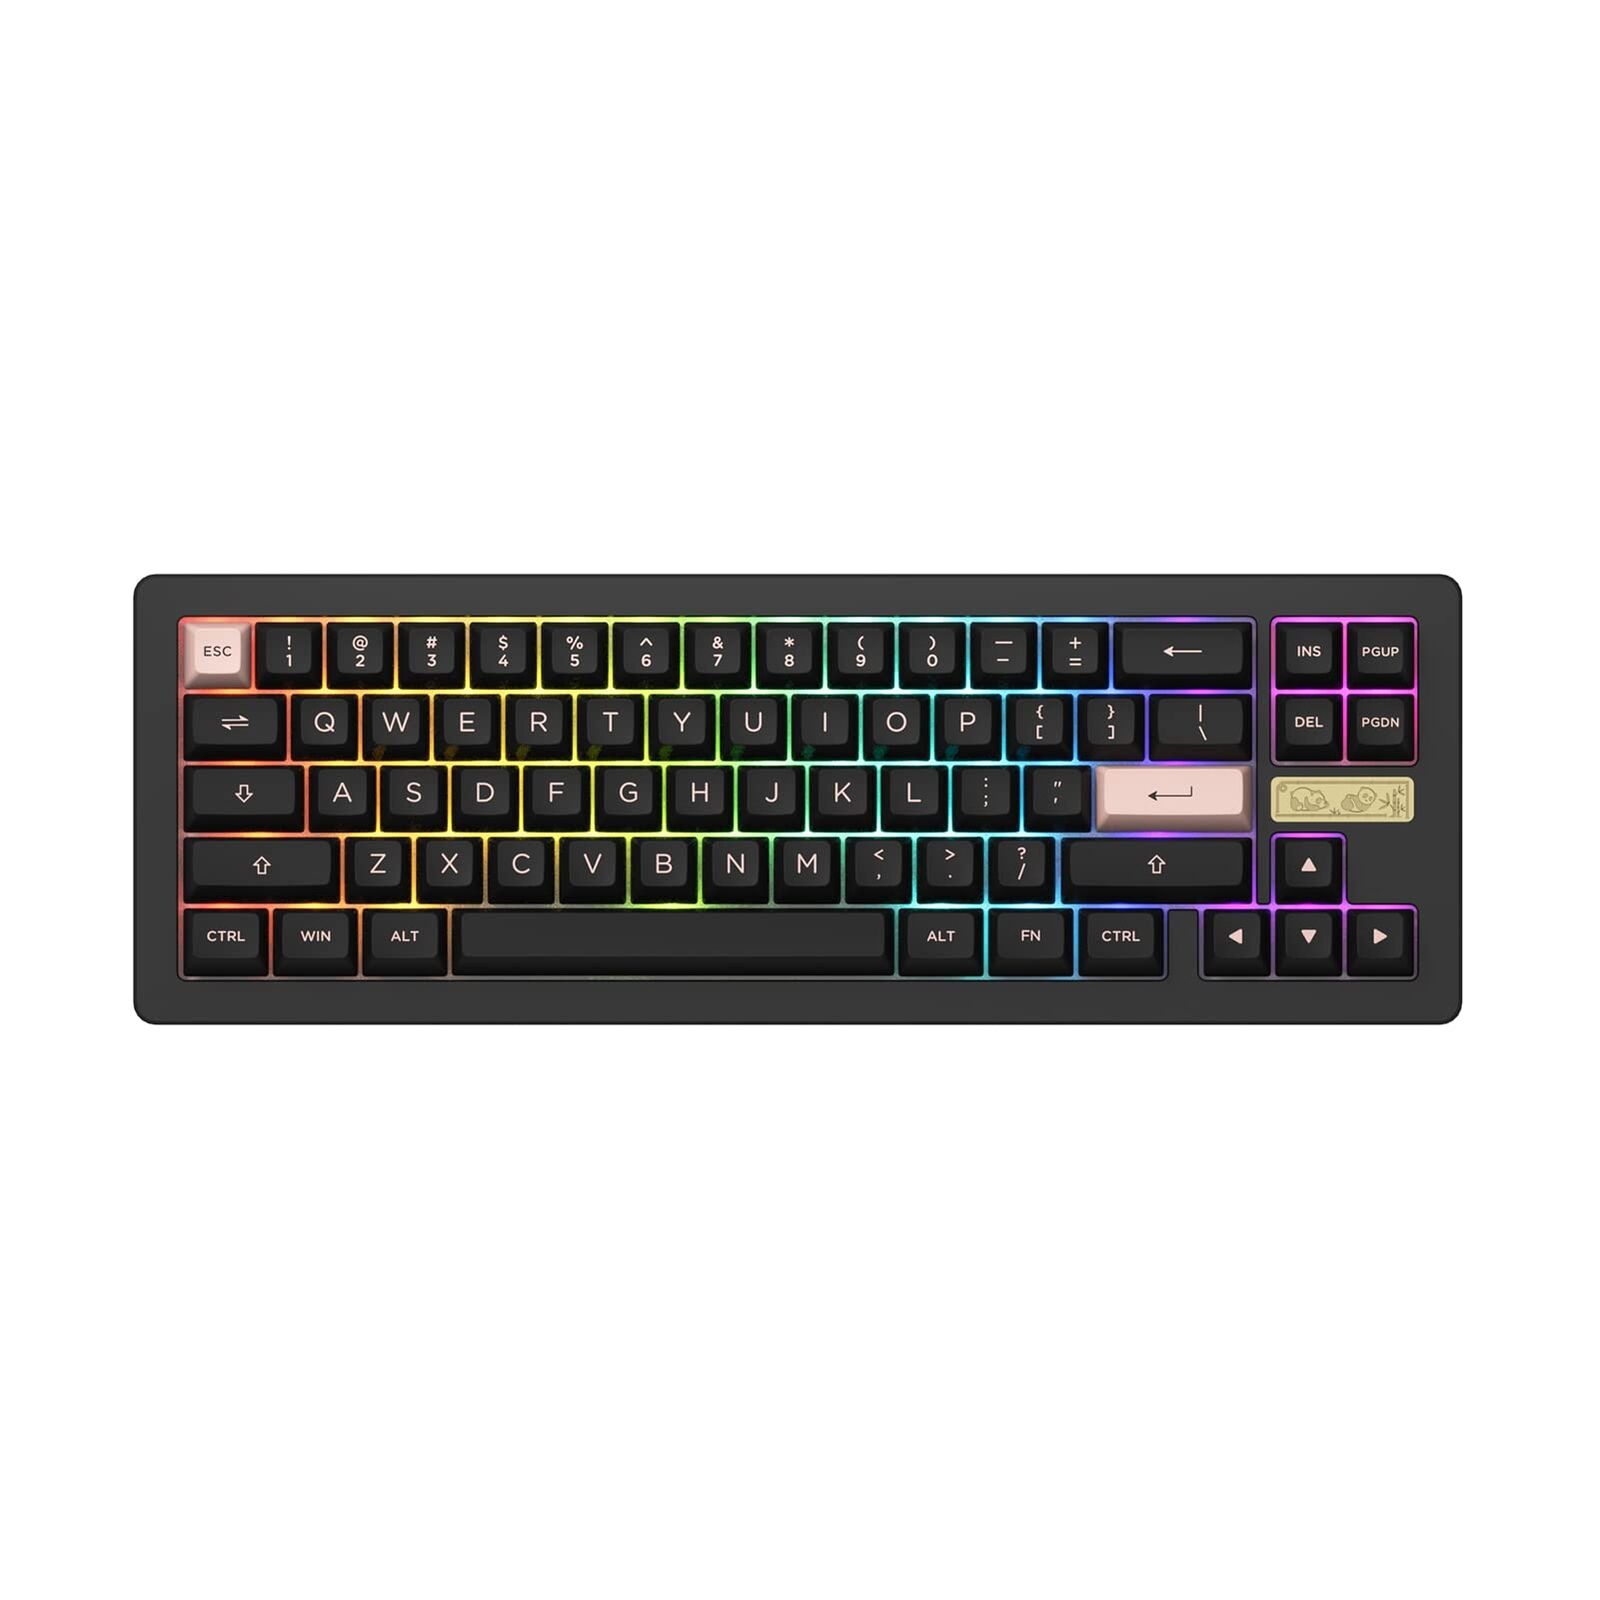 ACR Pro 68 Hot-swappable Mechanical Gaming Keyboard, 65 Percent 68-Key RGB Ba...